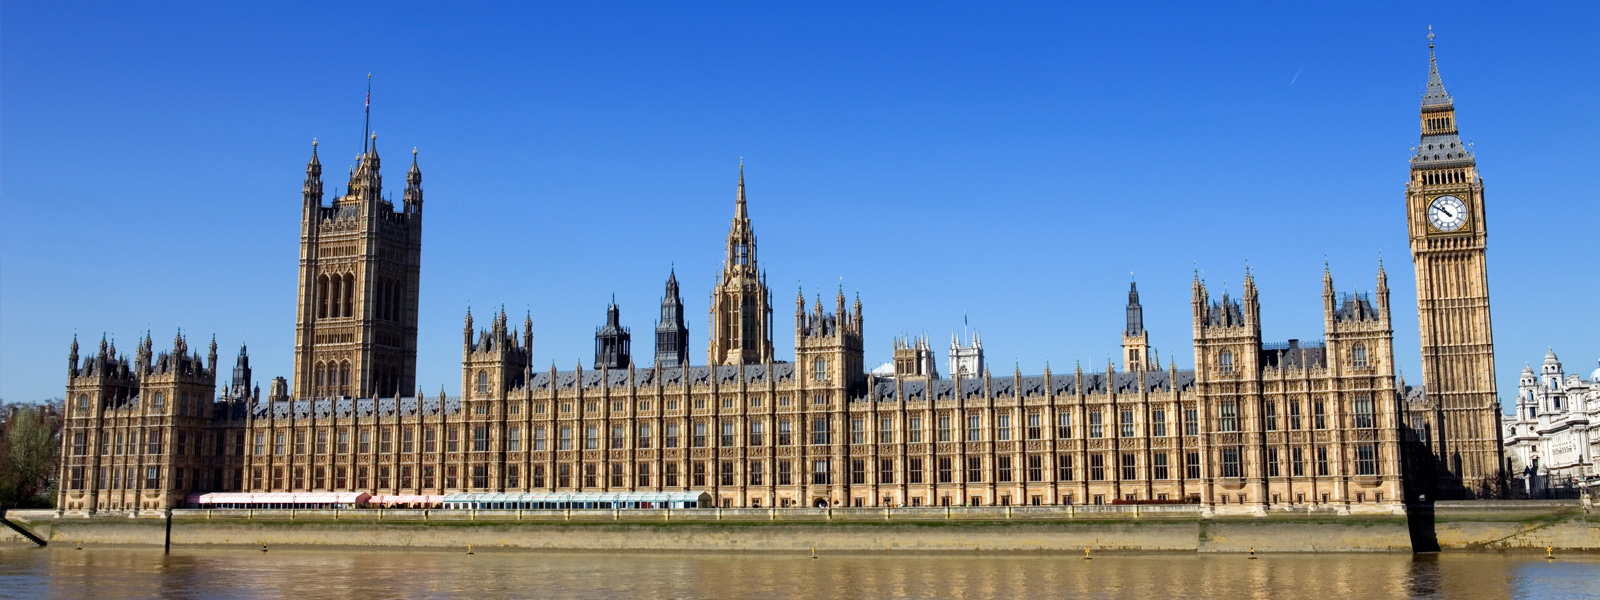 Palace Of Westminster Backgrounds on Wallpapers Vista